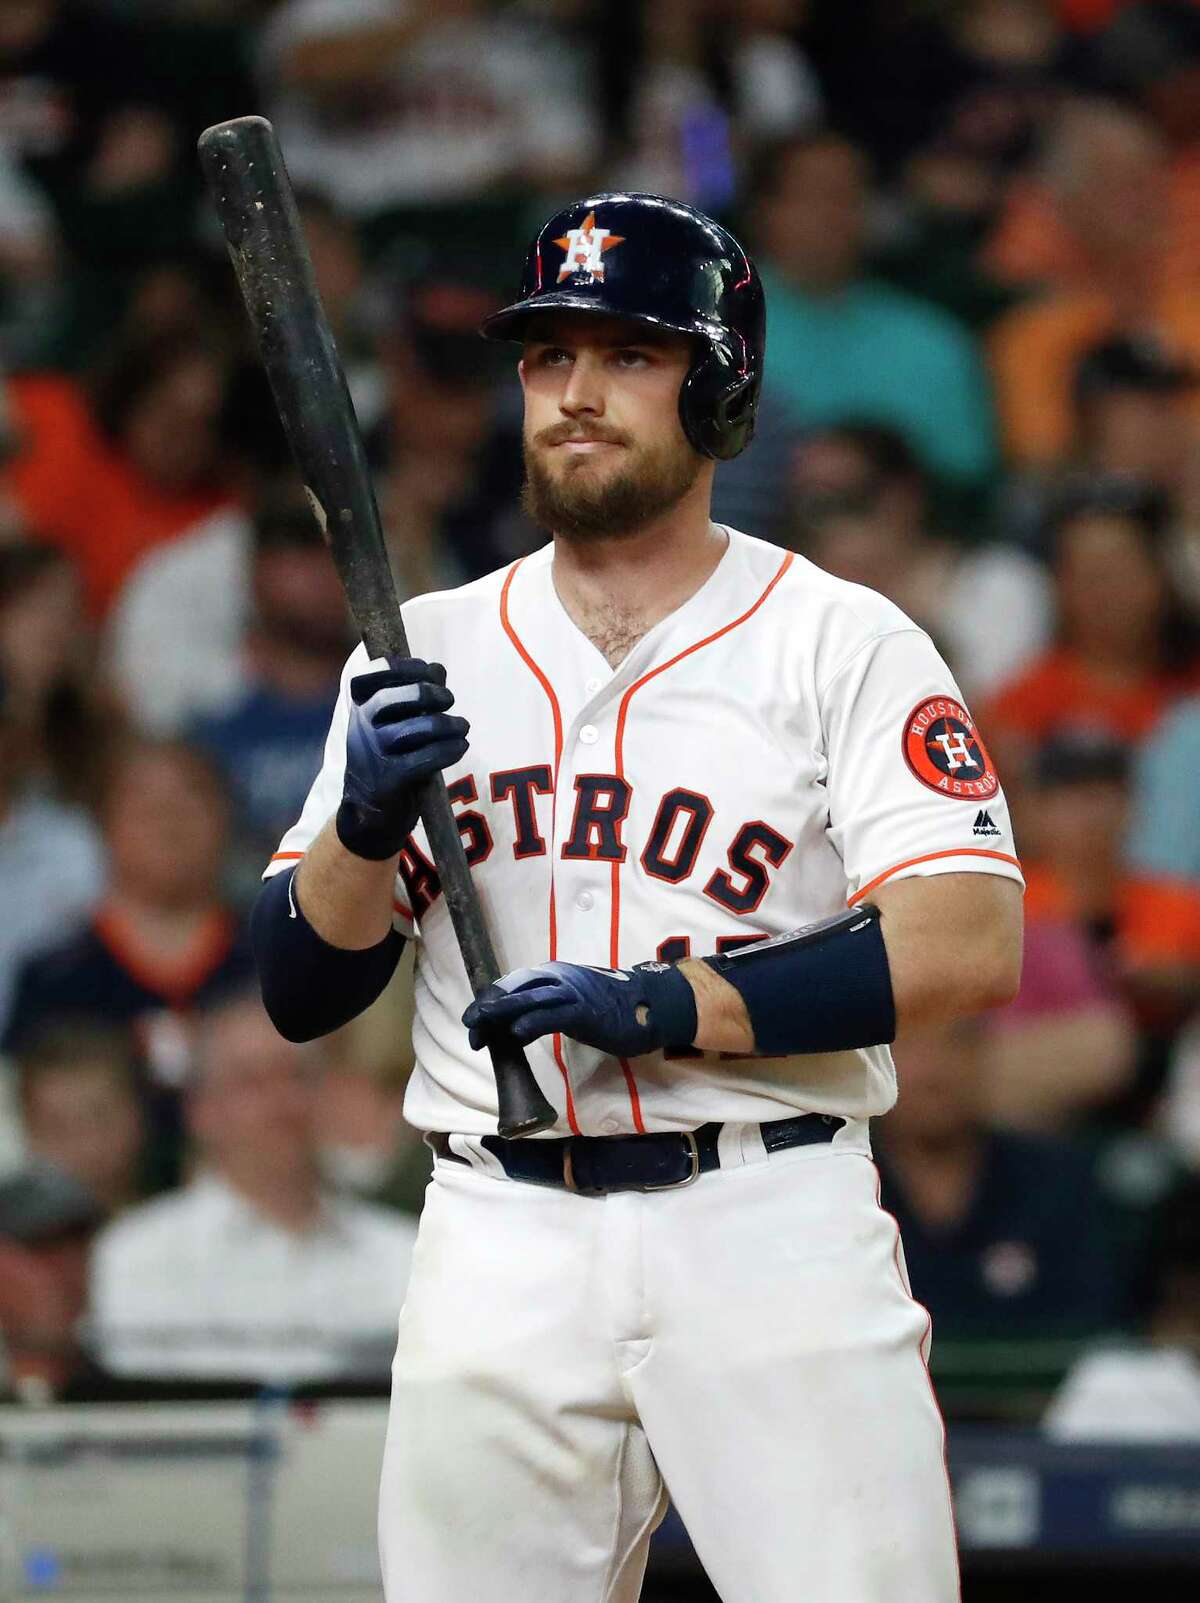 Max Stassi's batting power helps carve out role with Astros